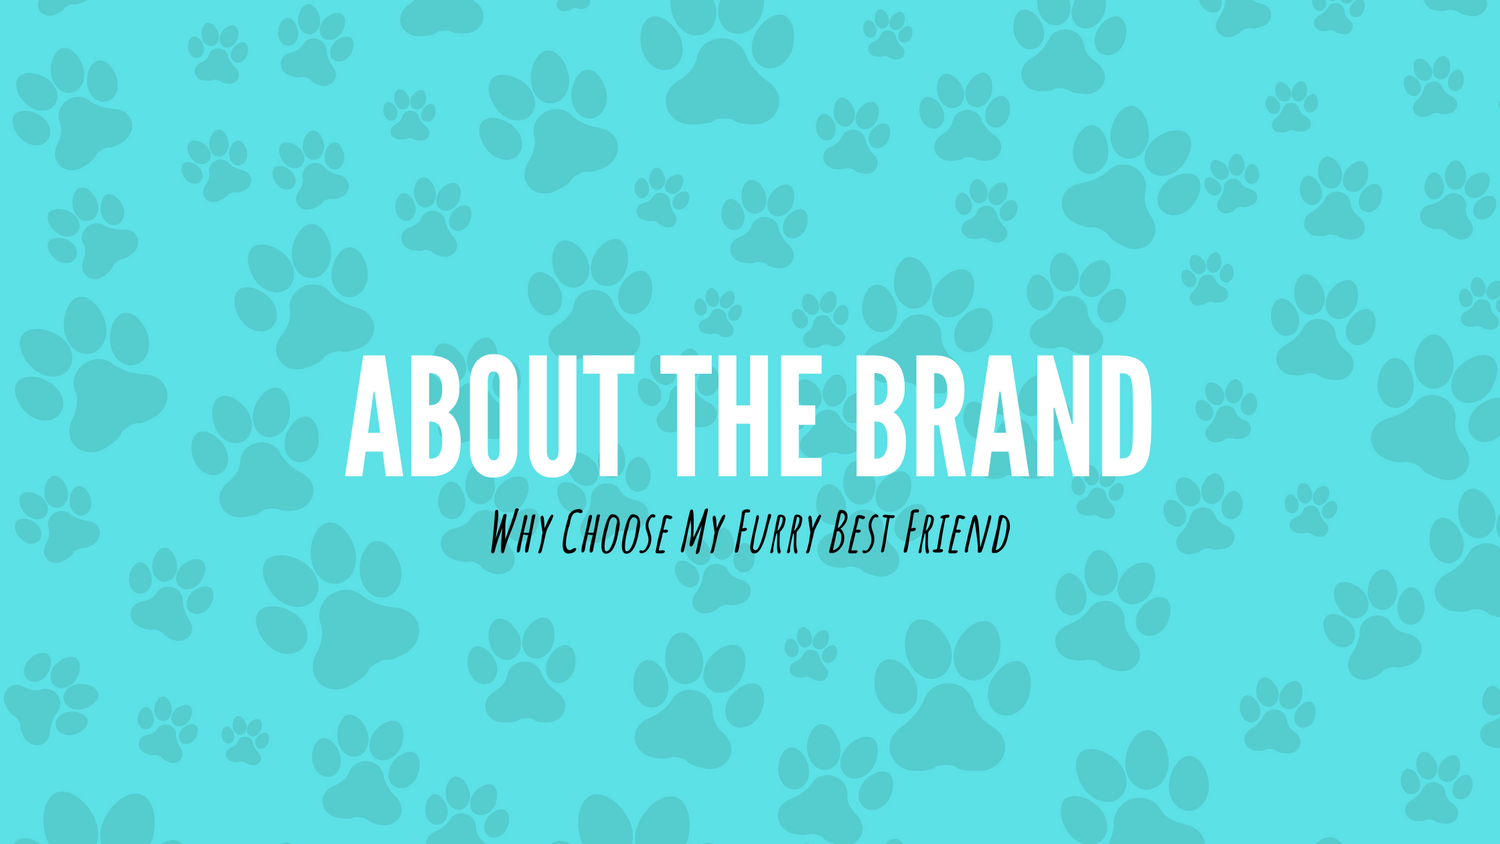 my furry best friend about the brand website banner